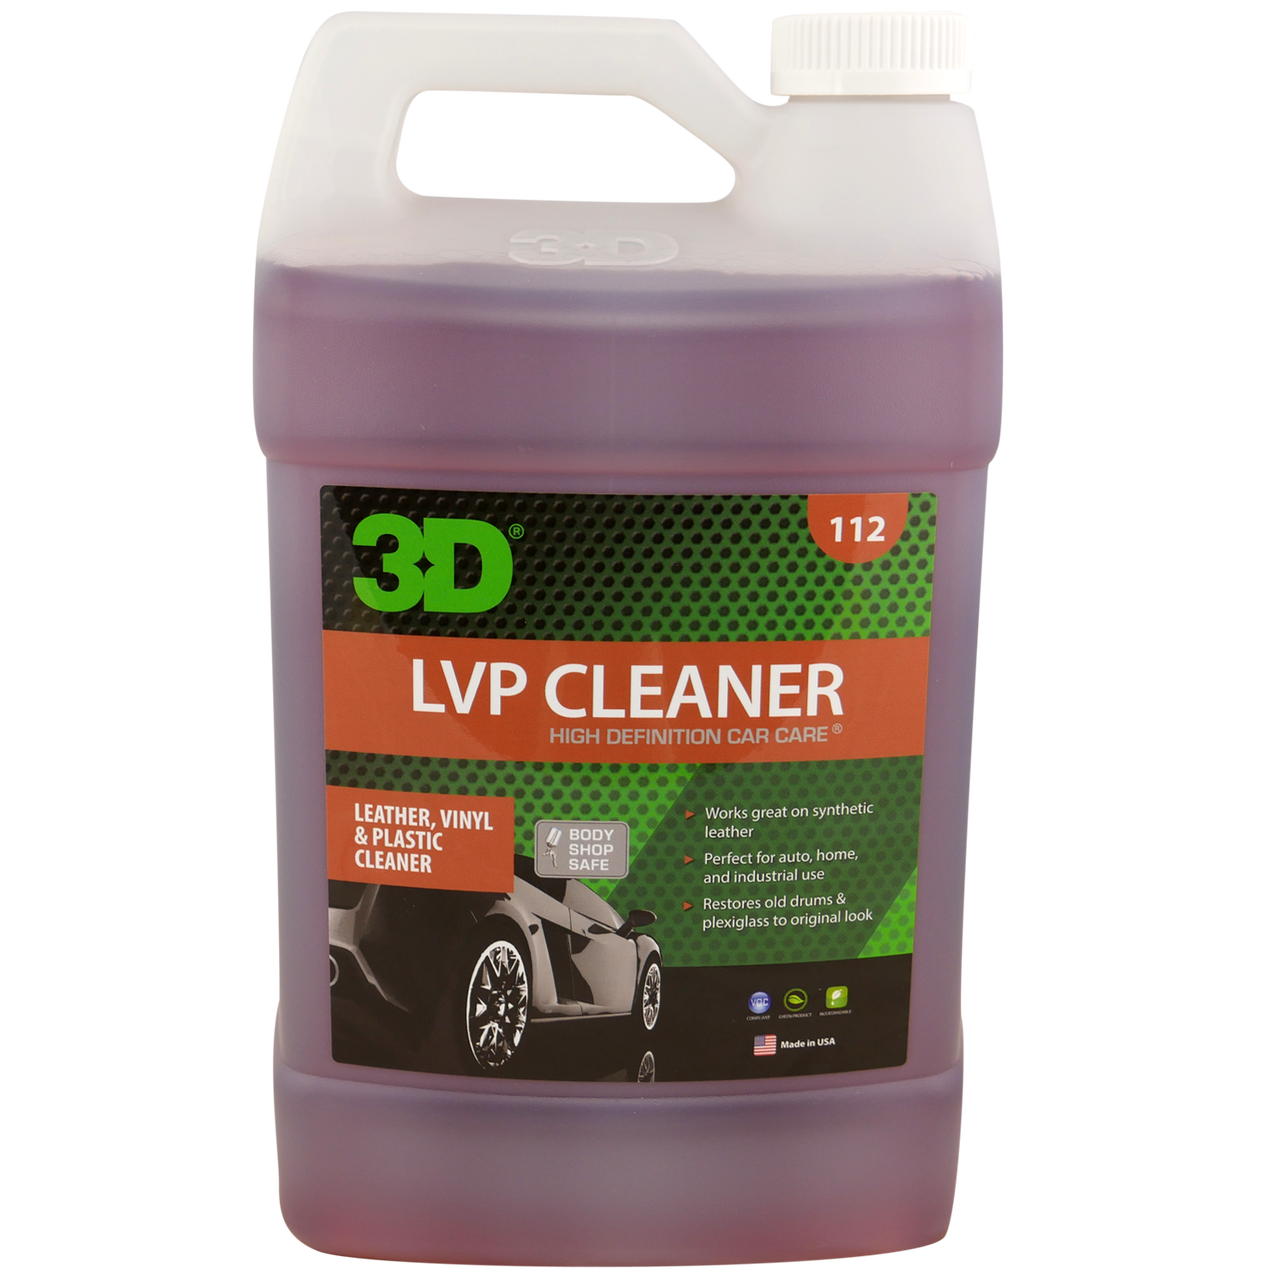 Using LVP cleaner for an interior detail 